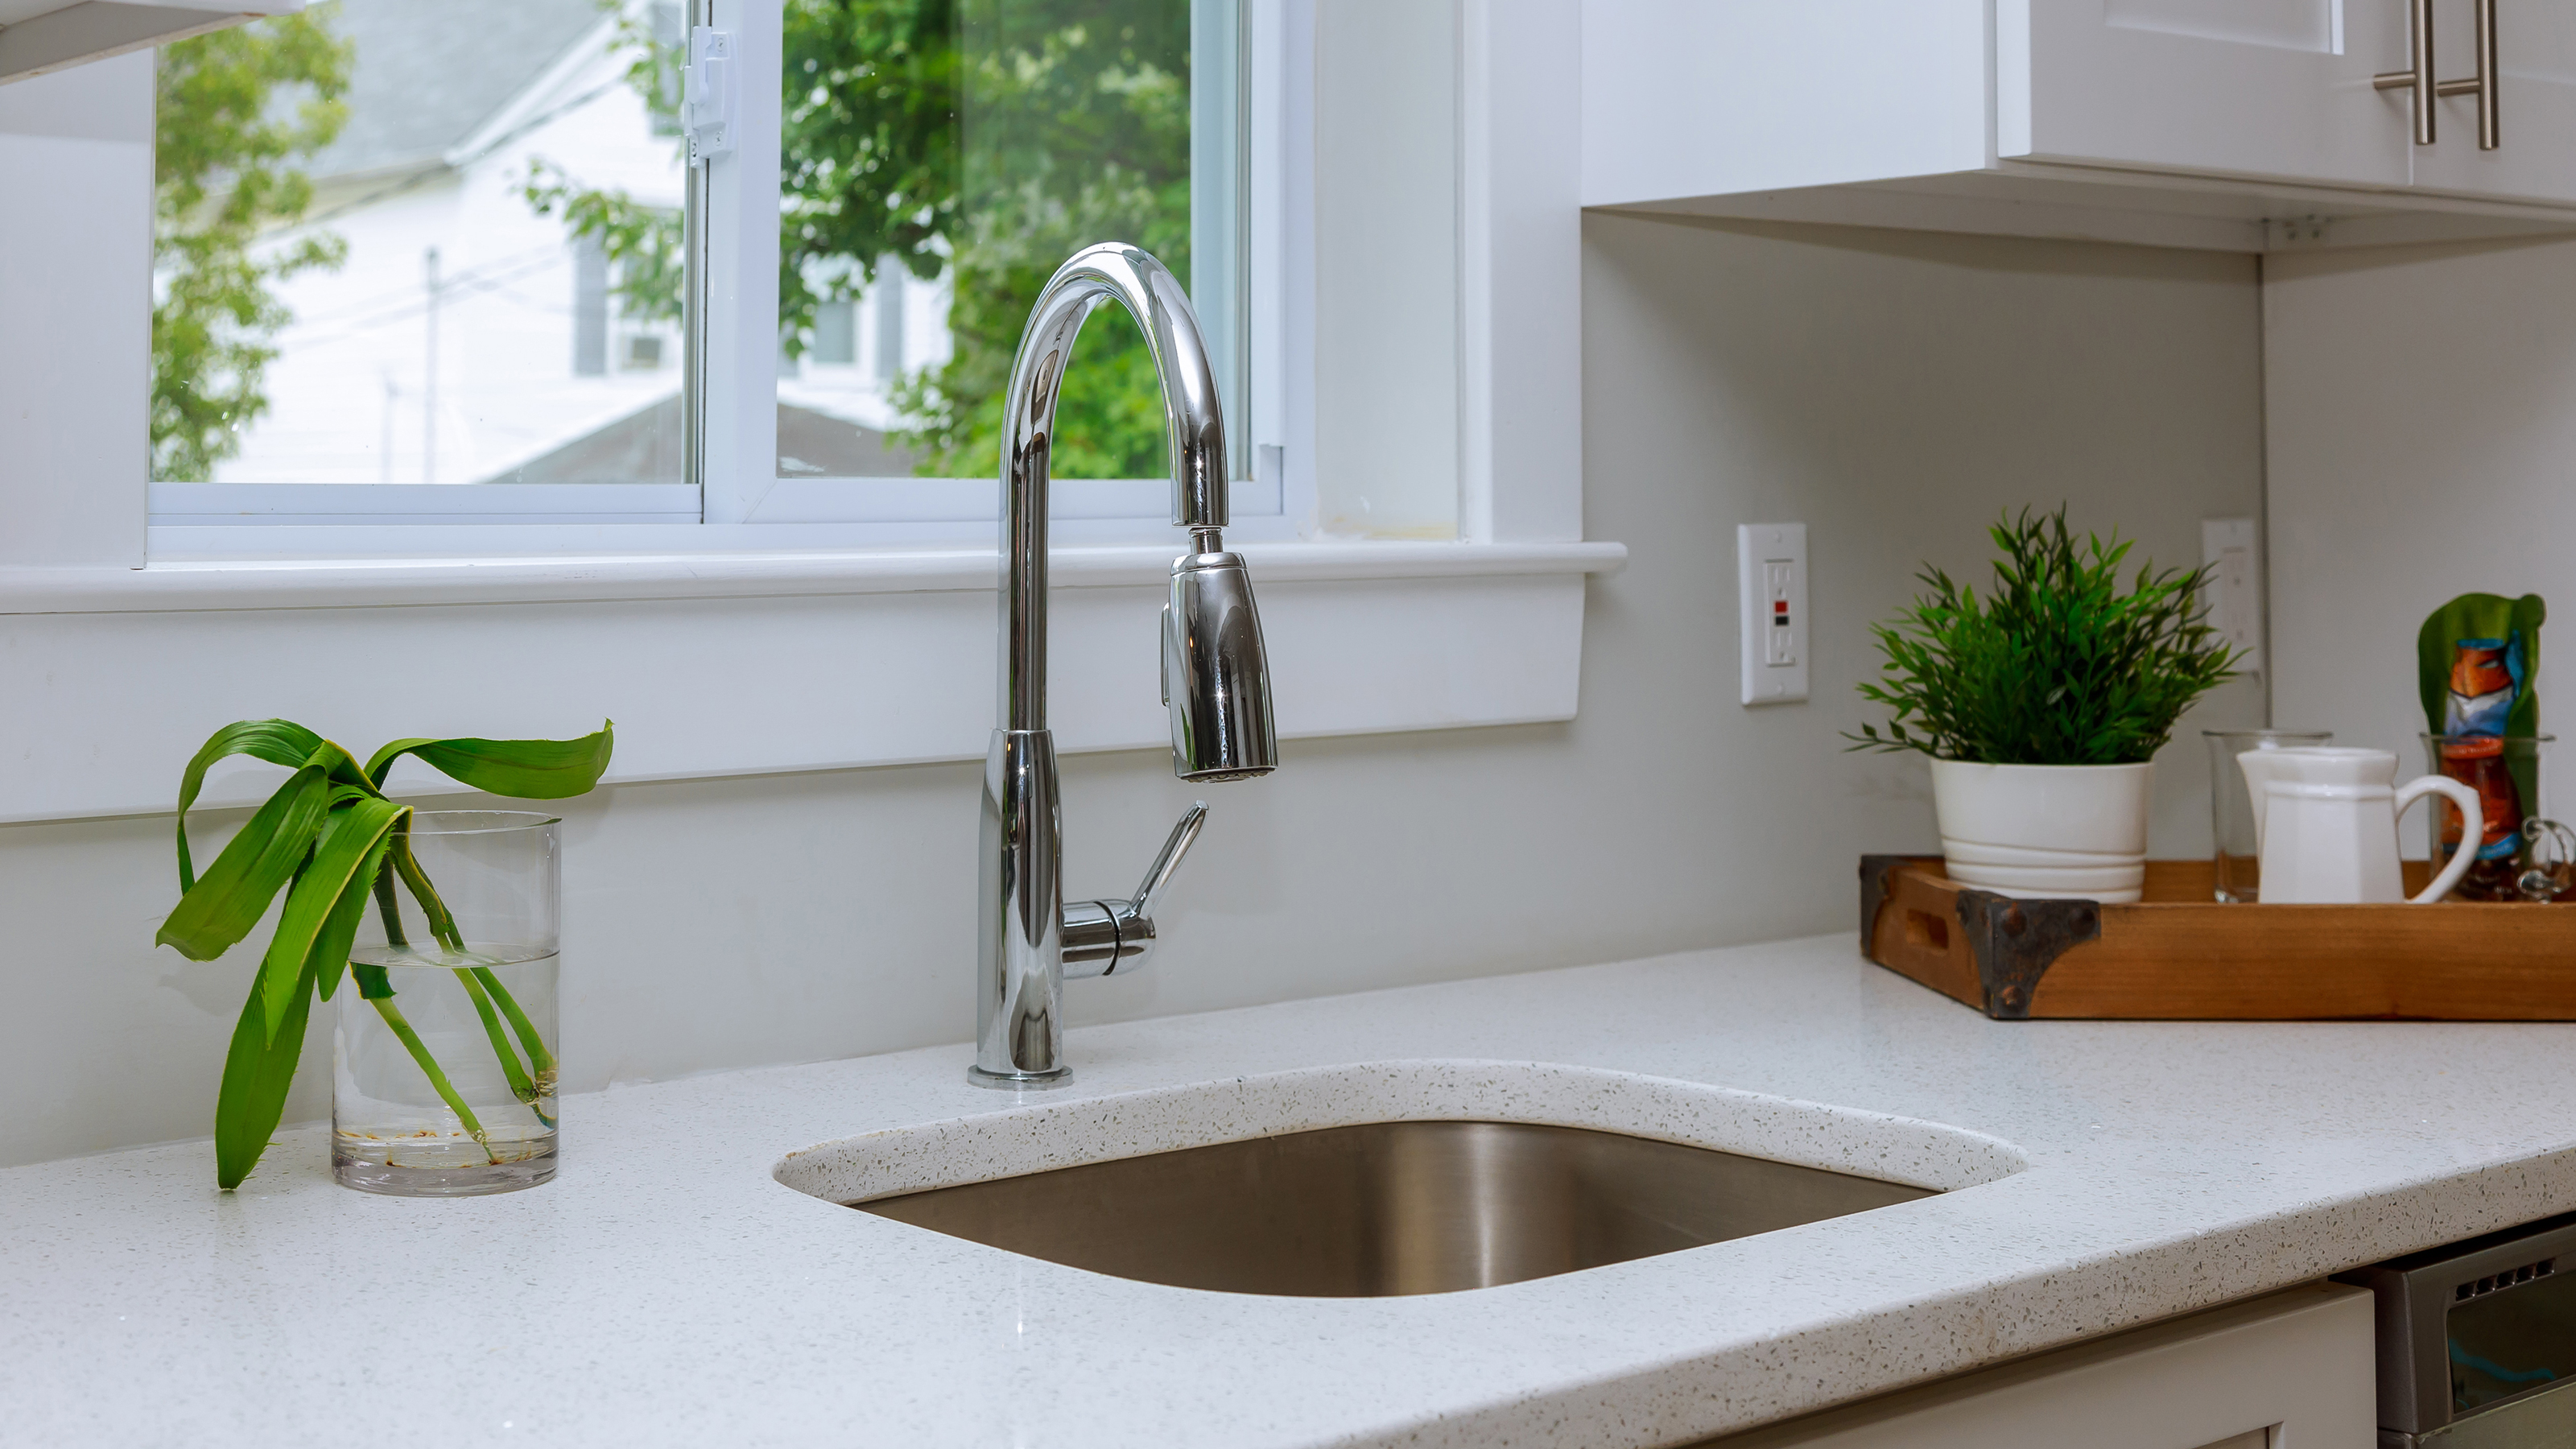 How To Unclog A Sink Drain Successfully